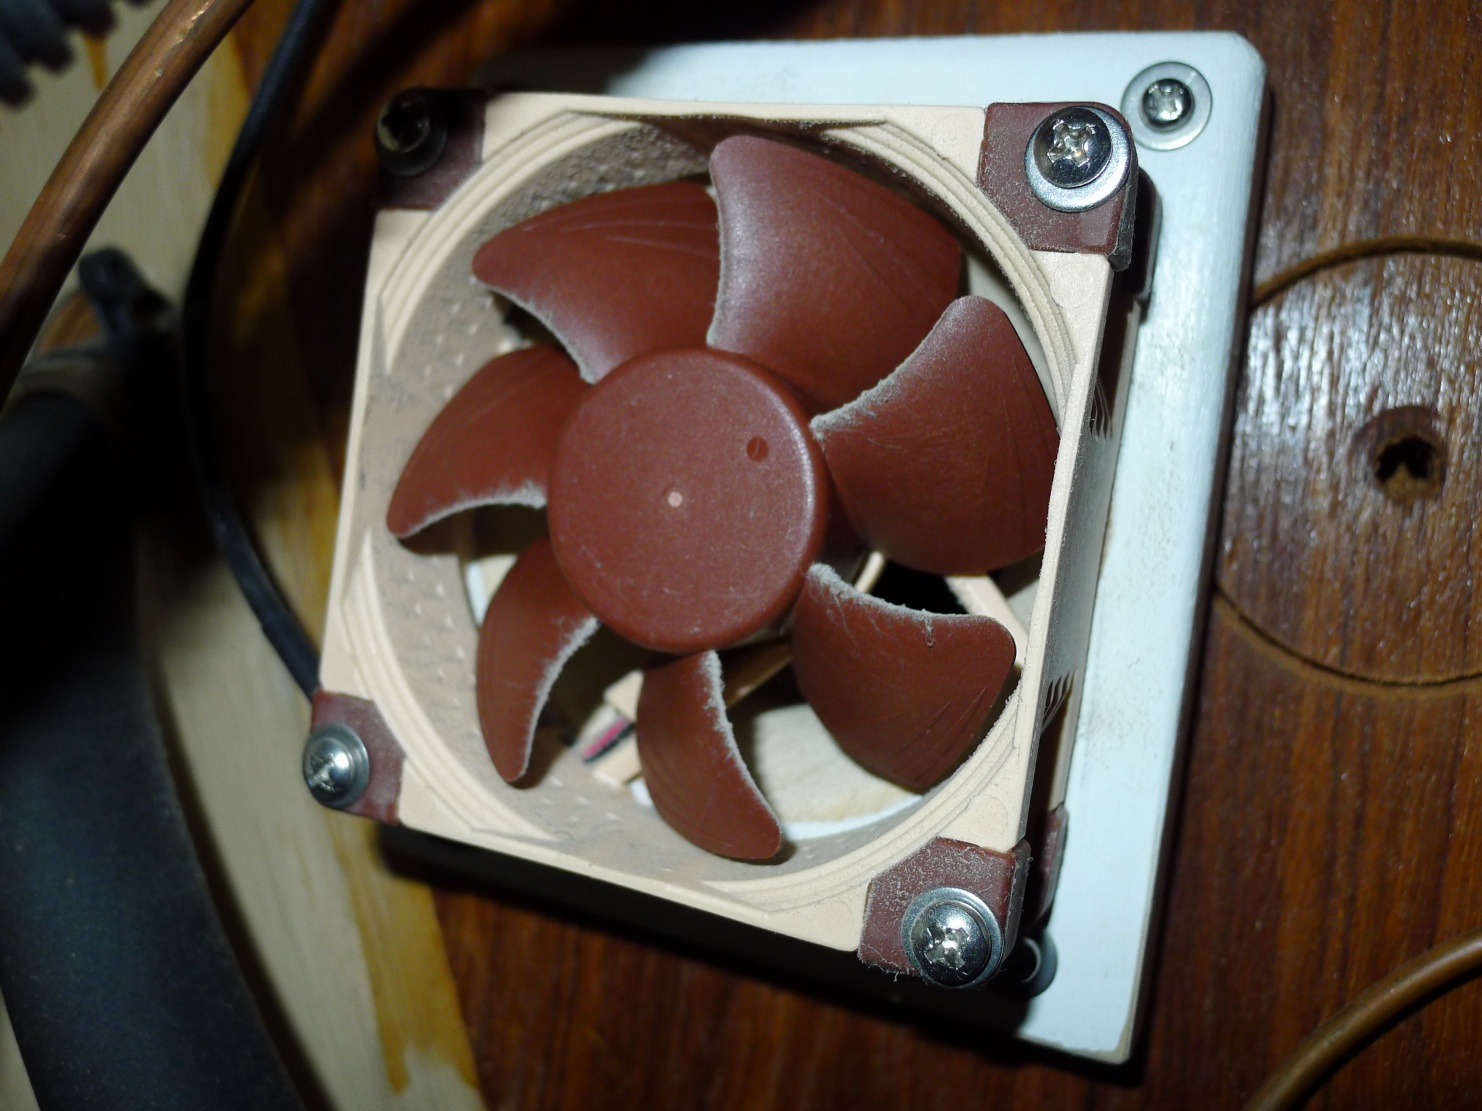 Computer Fan for Refrigerator Cooling? - Page 2 - Cruisers & Sailing Forums